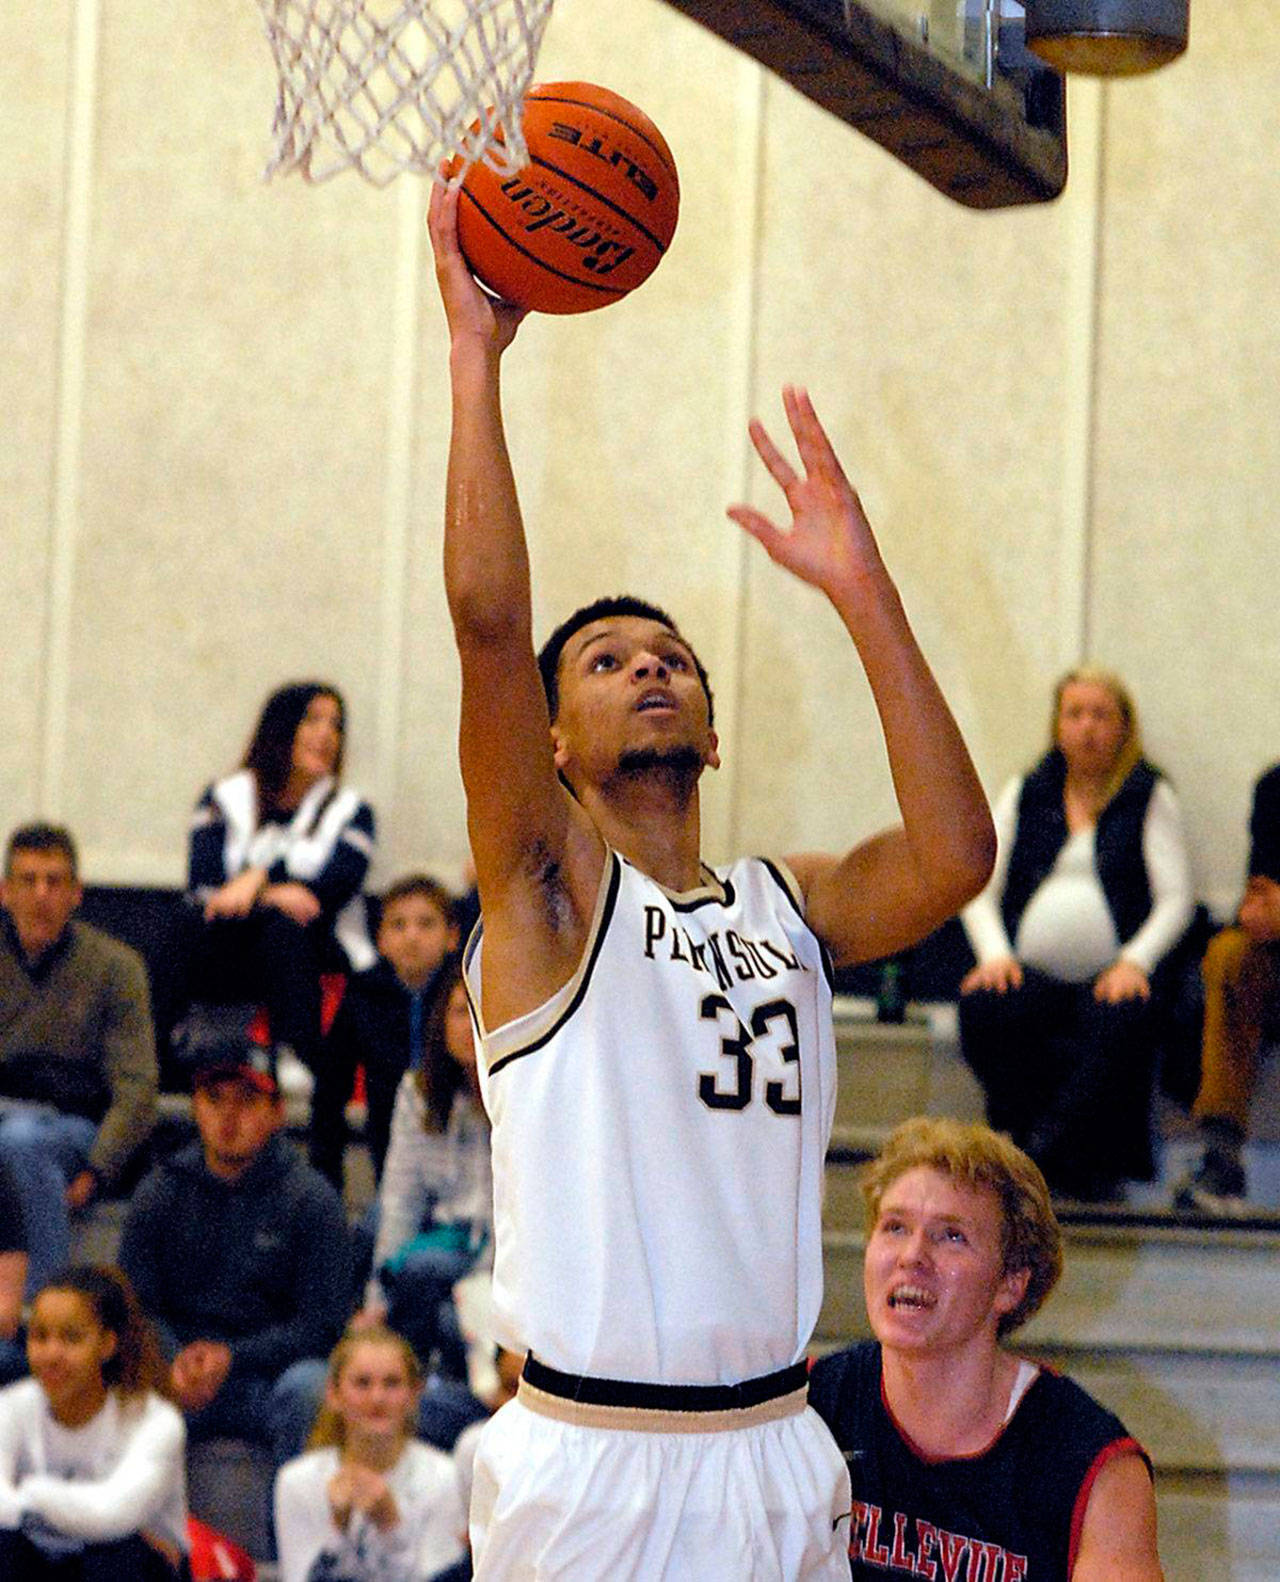 Kevin Baker was a solid, efficient player for Peninsula College two years ago. Now, he is a big star for Green River College, who the Pirates will face in the opening round of the NWAC Tournament on Thursday. (Keith Thorpe/Peninsula Daily News)